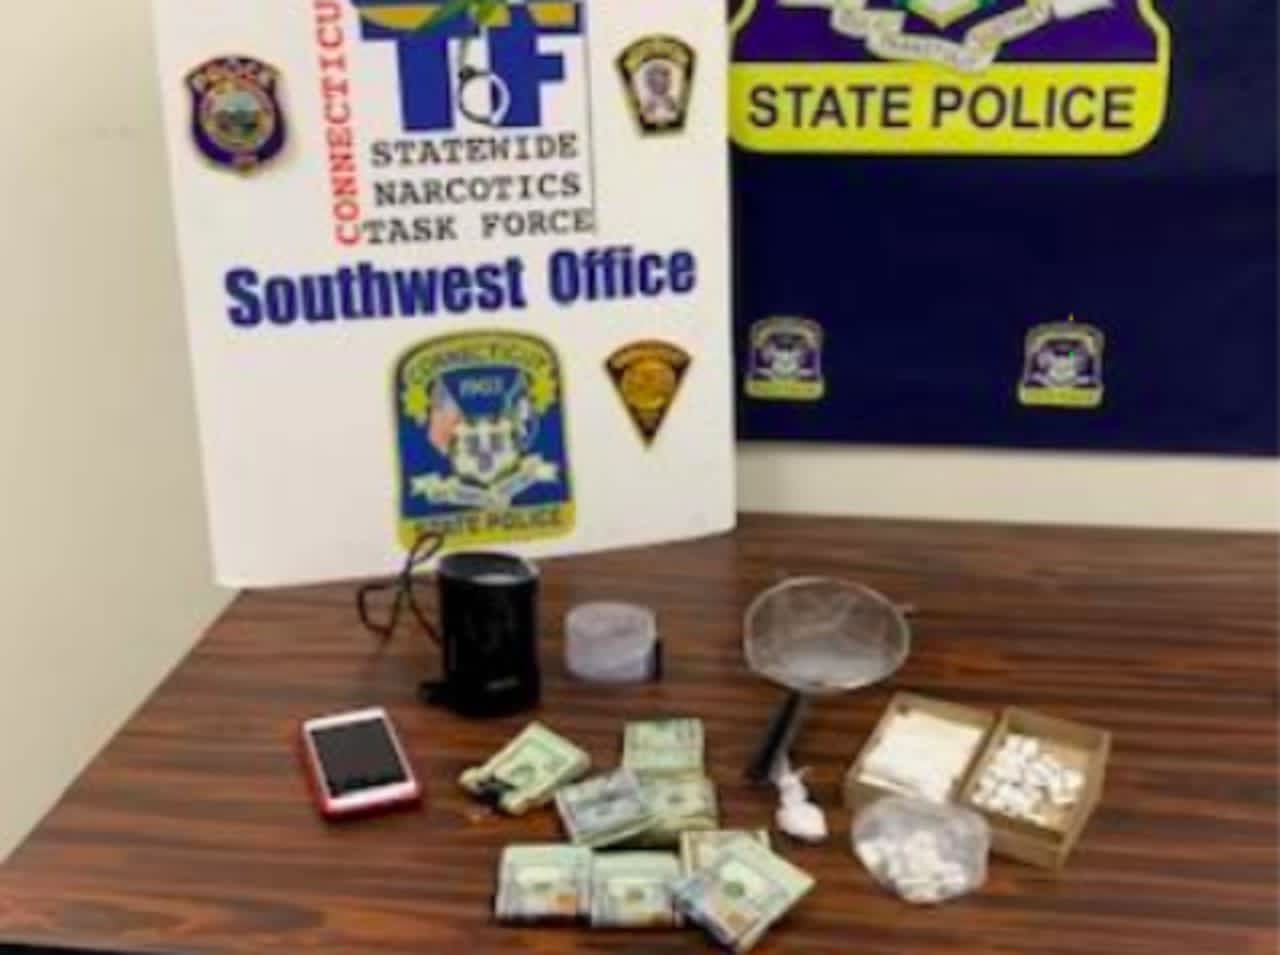 A photo of the confiscated cash and narcotics.